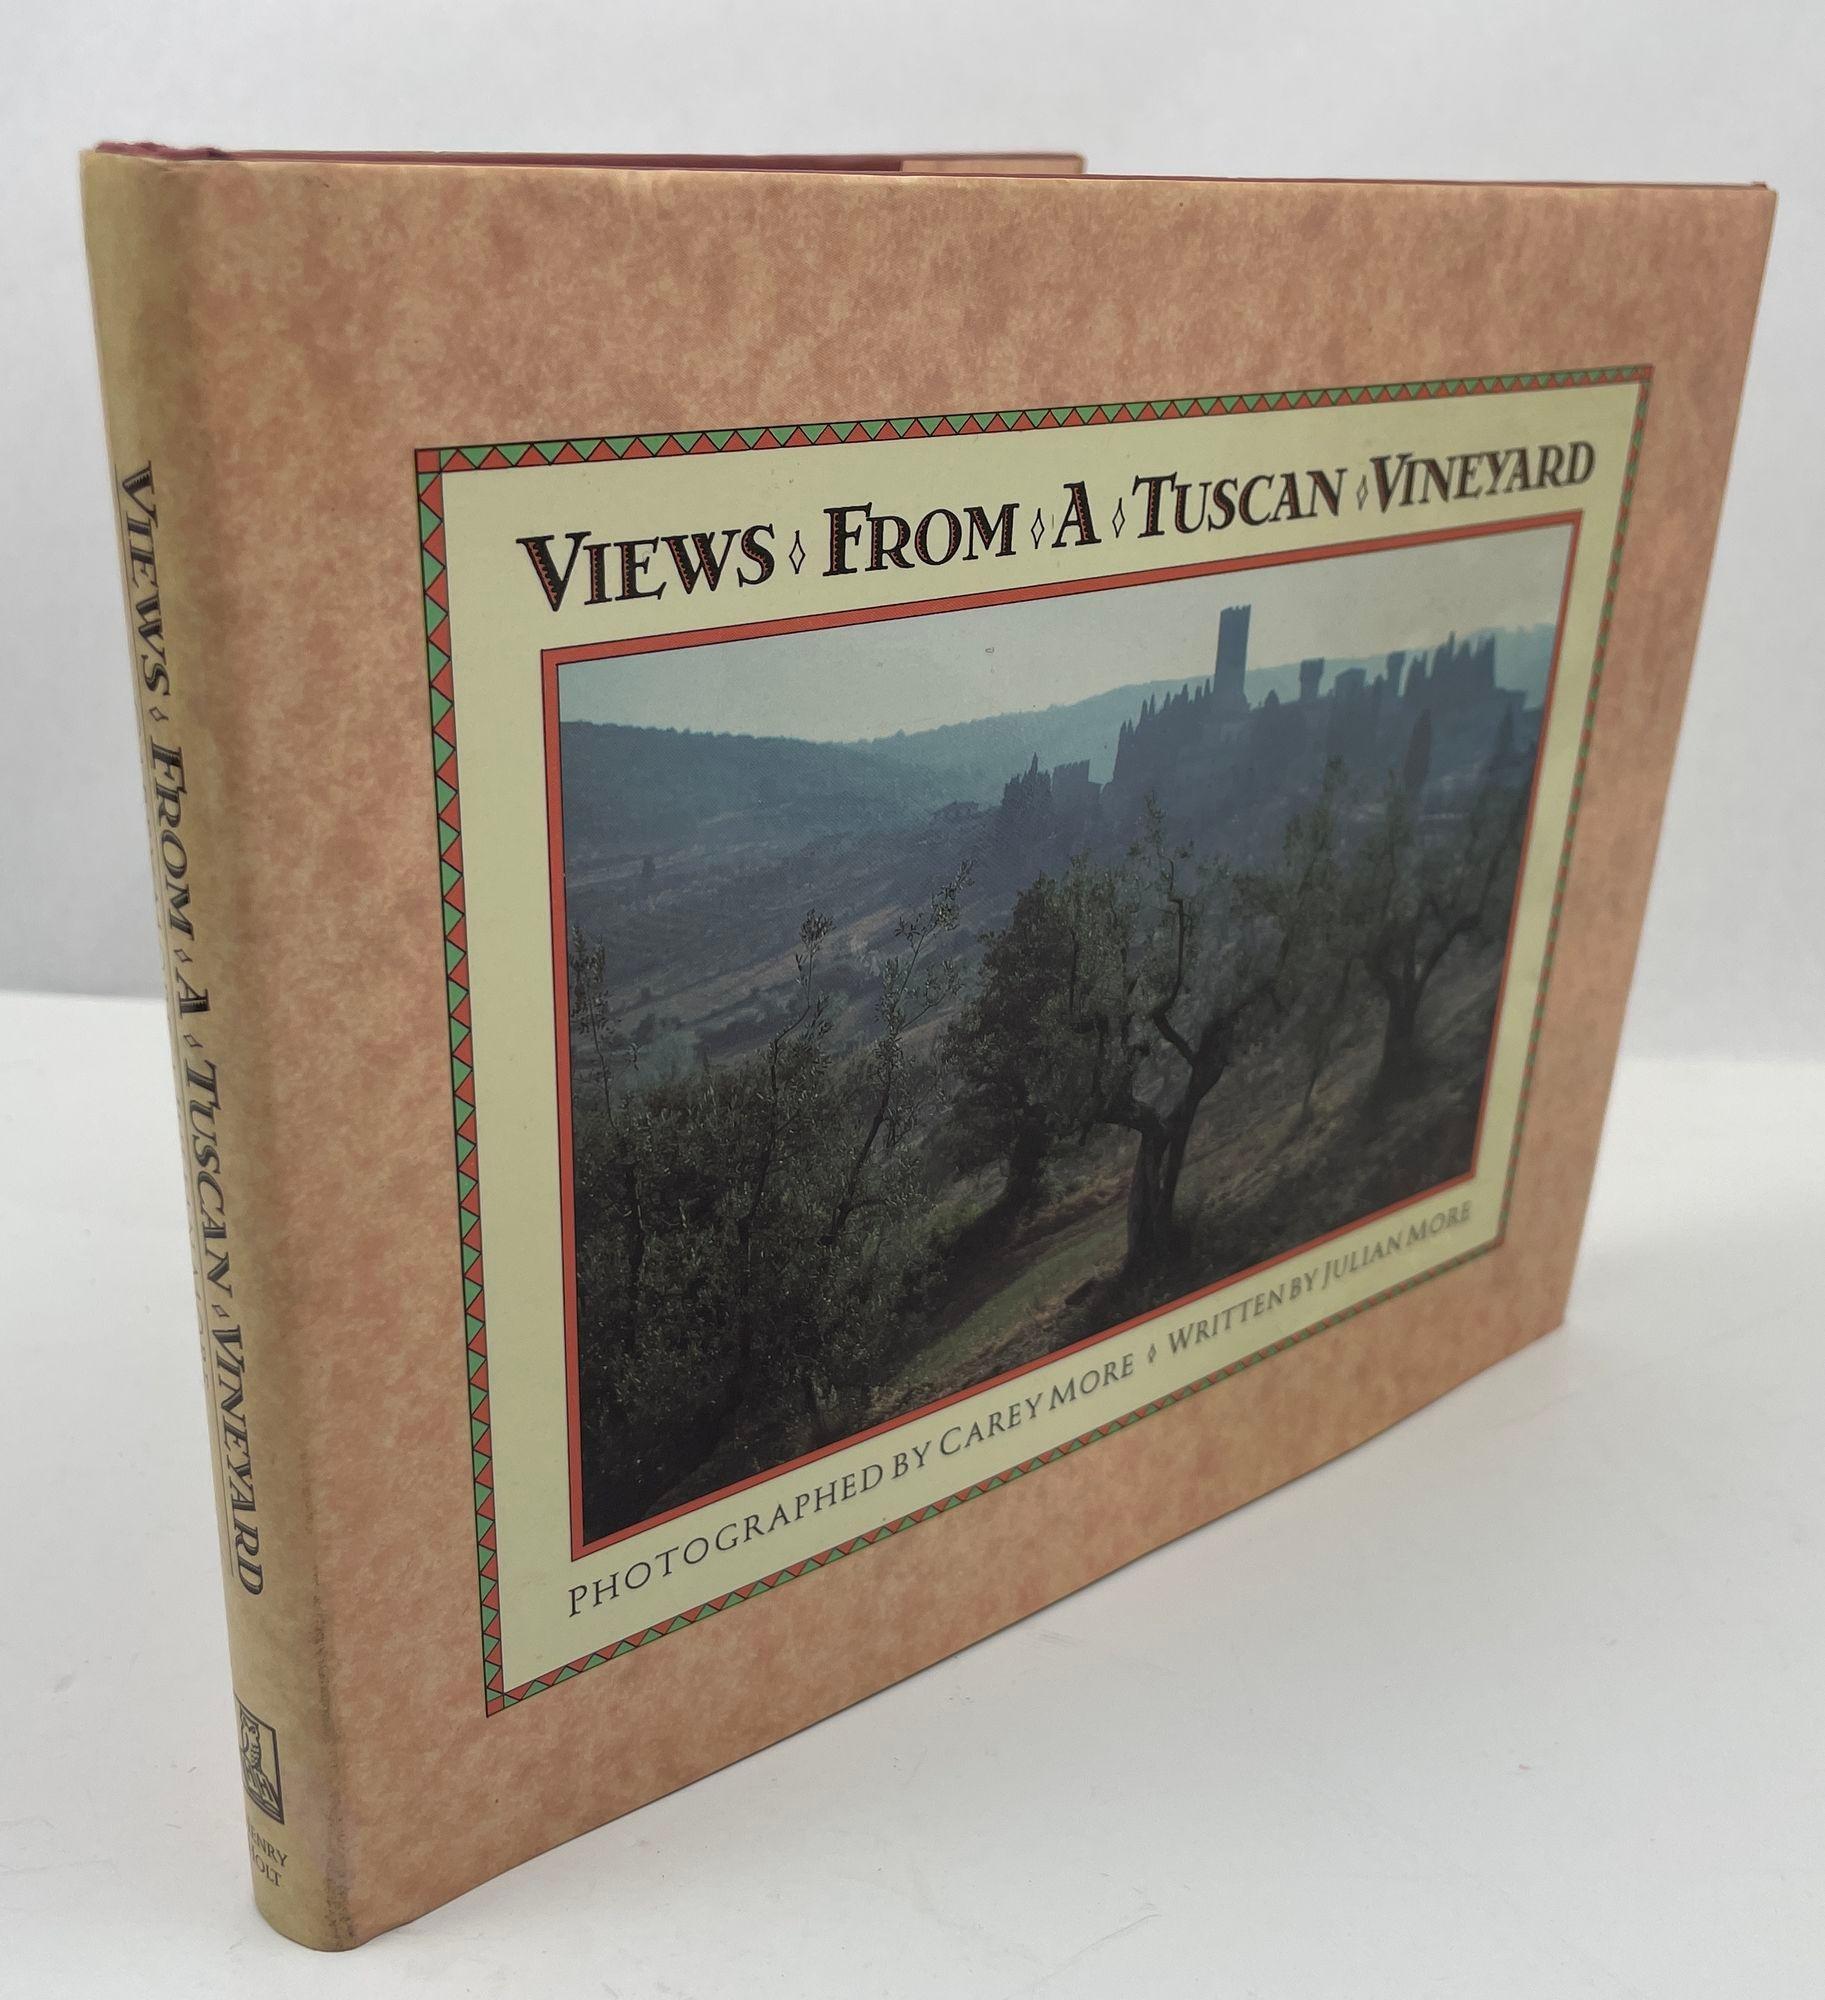 Italian Views from a Tuscan Vineyard Hardcover Book by Julian and Carey More 1987 For Sale